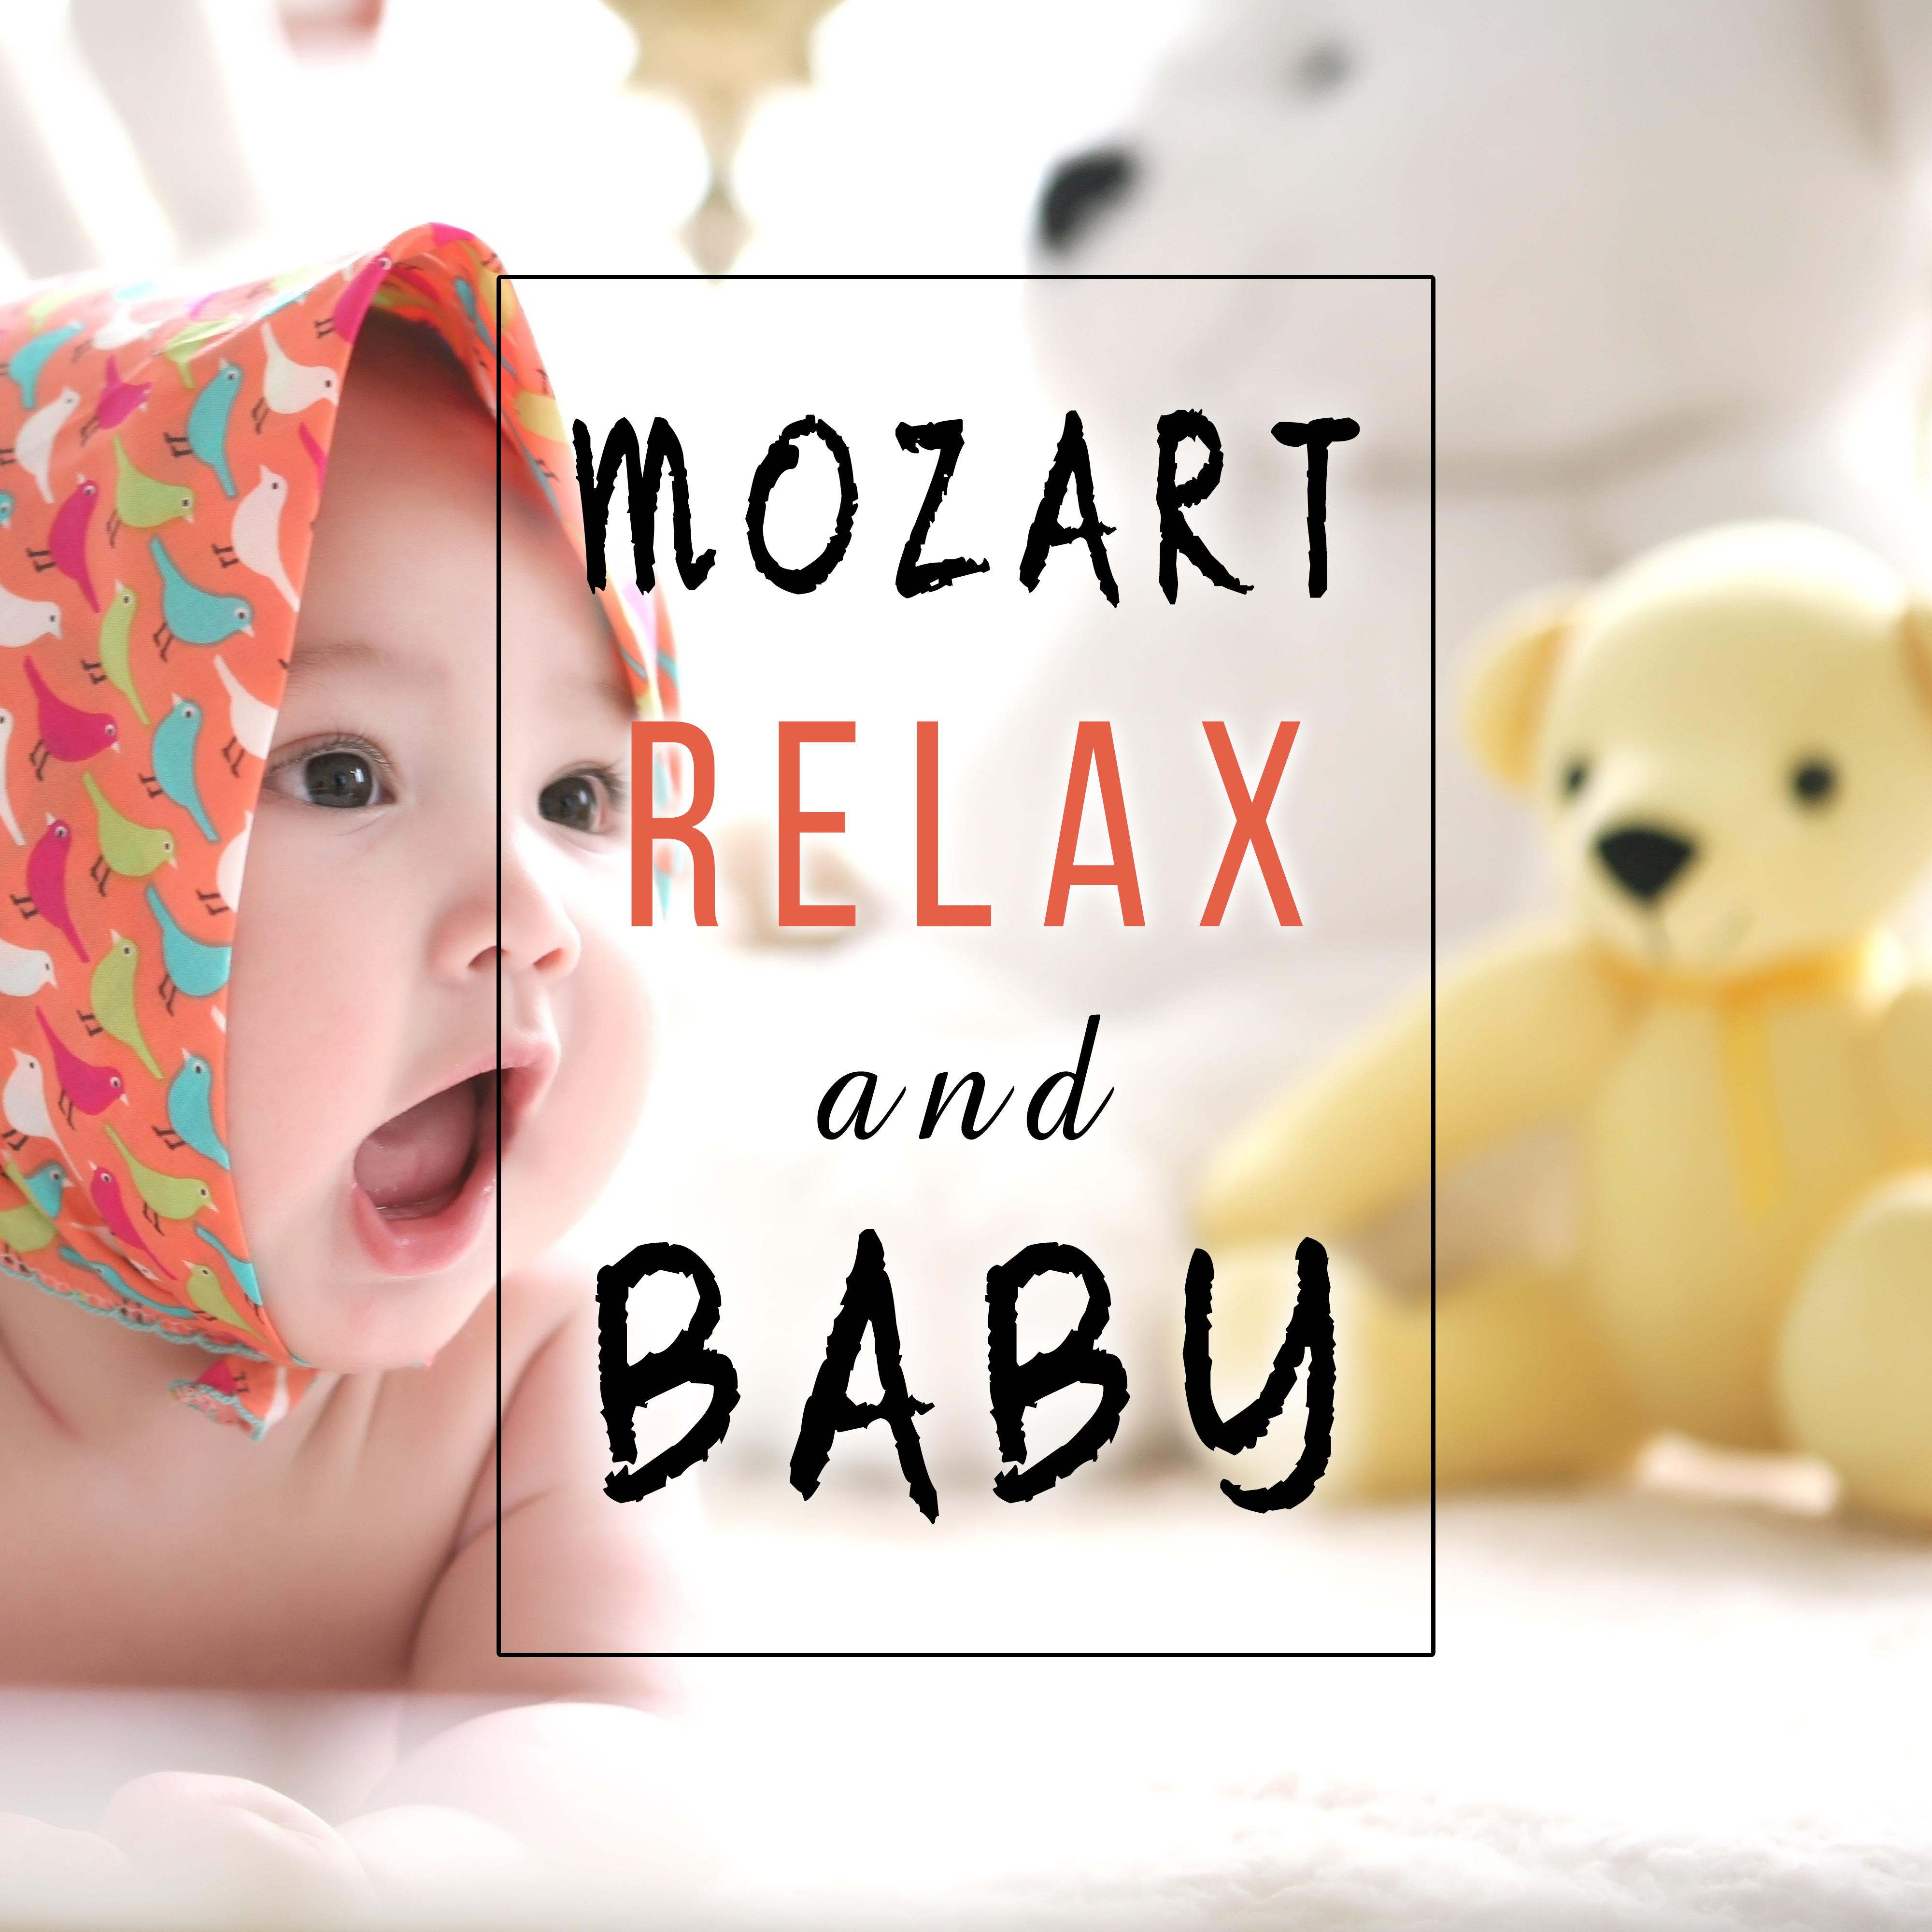 Mozart, Relax and Baby  Classical Songs for Baby, Time with Mozart, Music for Relaxation and Listening, Effect Lullabies